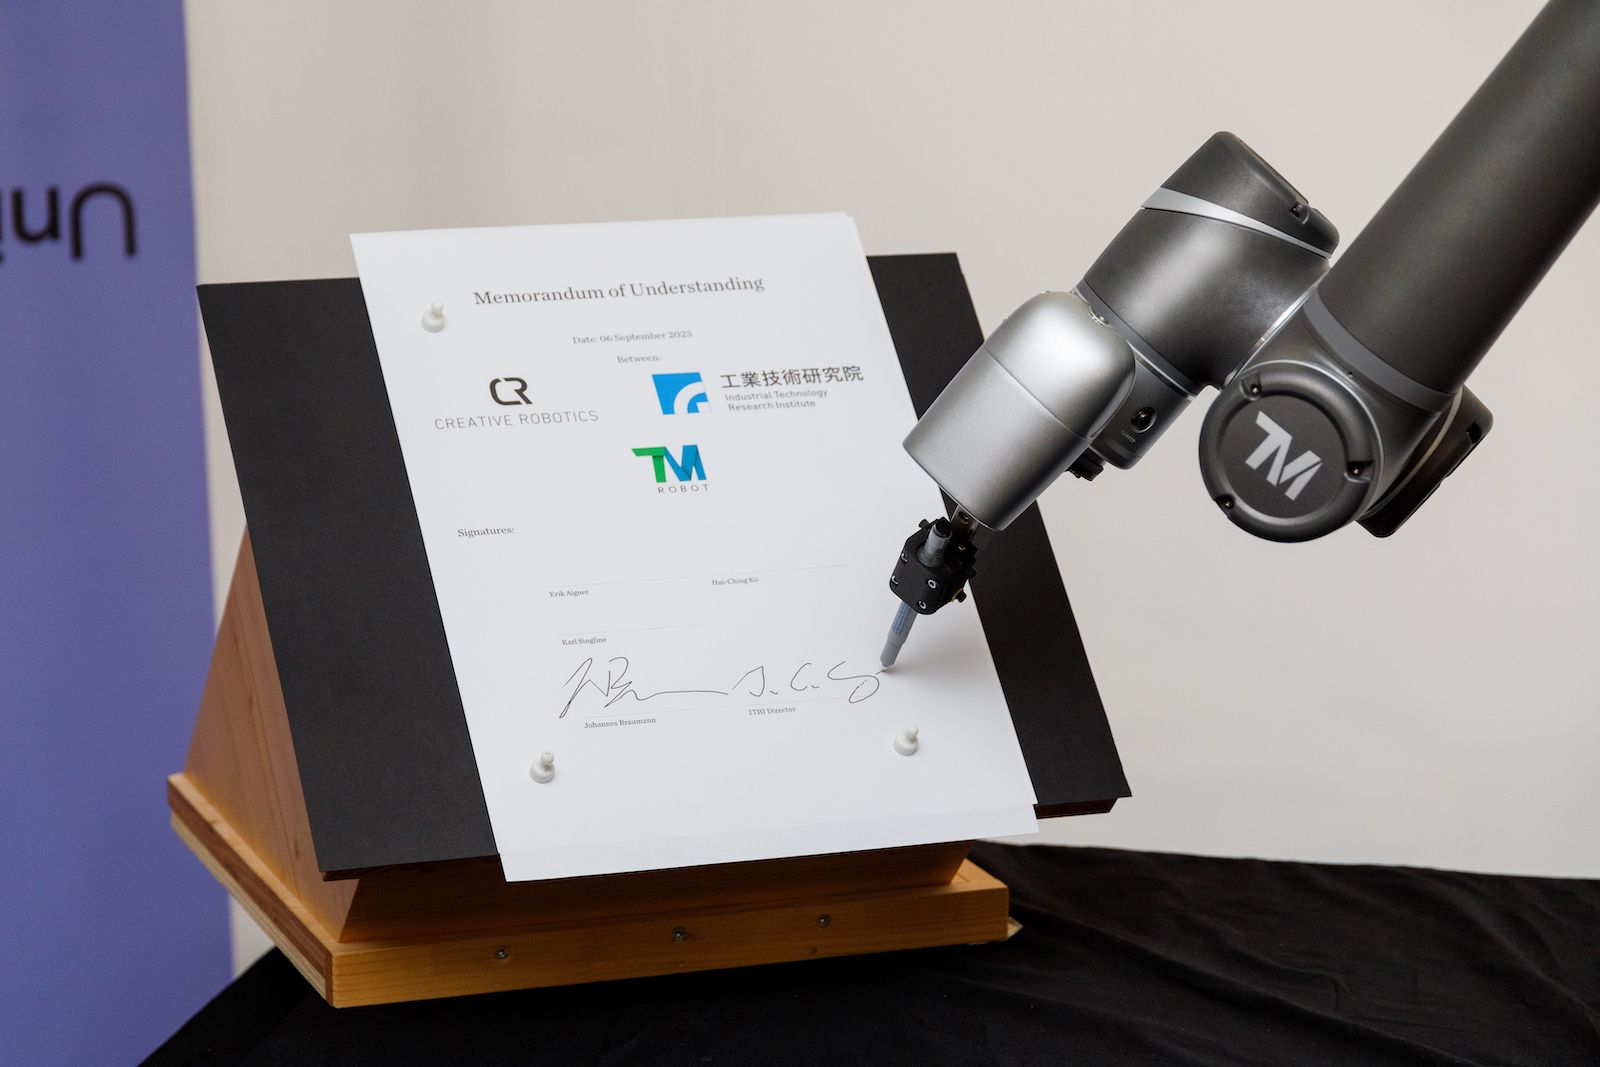 The MOU is signed by Techman Robot’s robotic arm, representing ITRI’s General Director of Service Systems Technology Center Jen-Chieh Cheng and CR Founder Johannes Braumann.